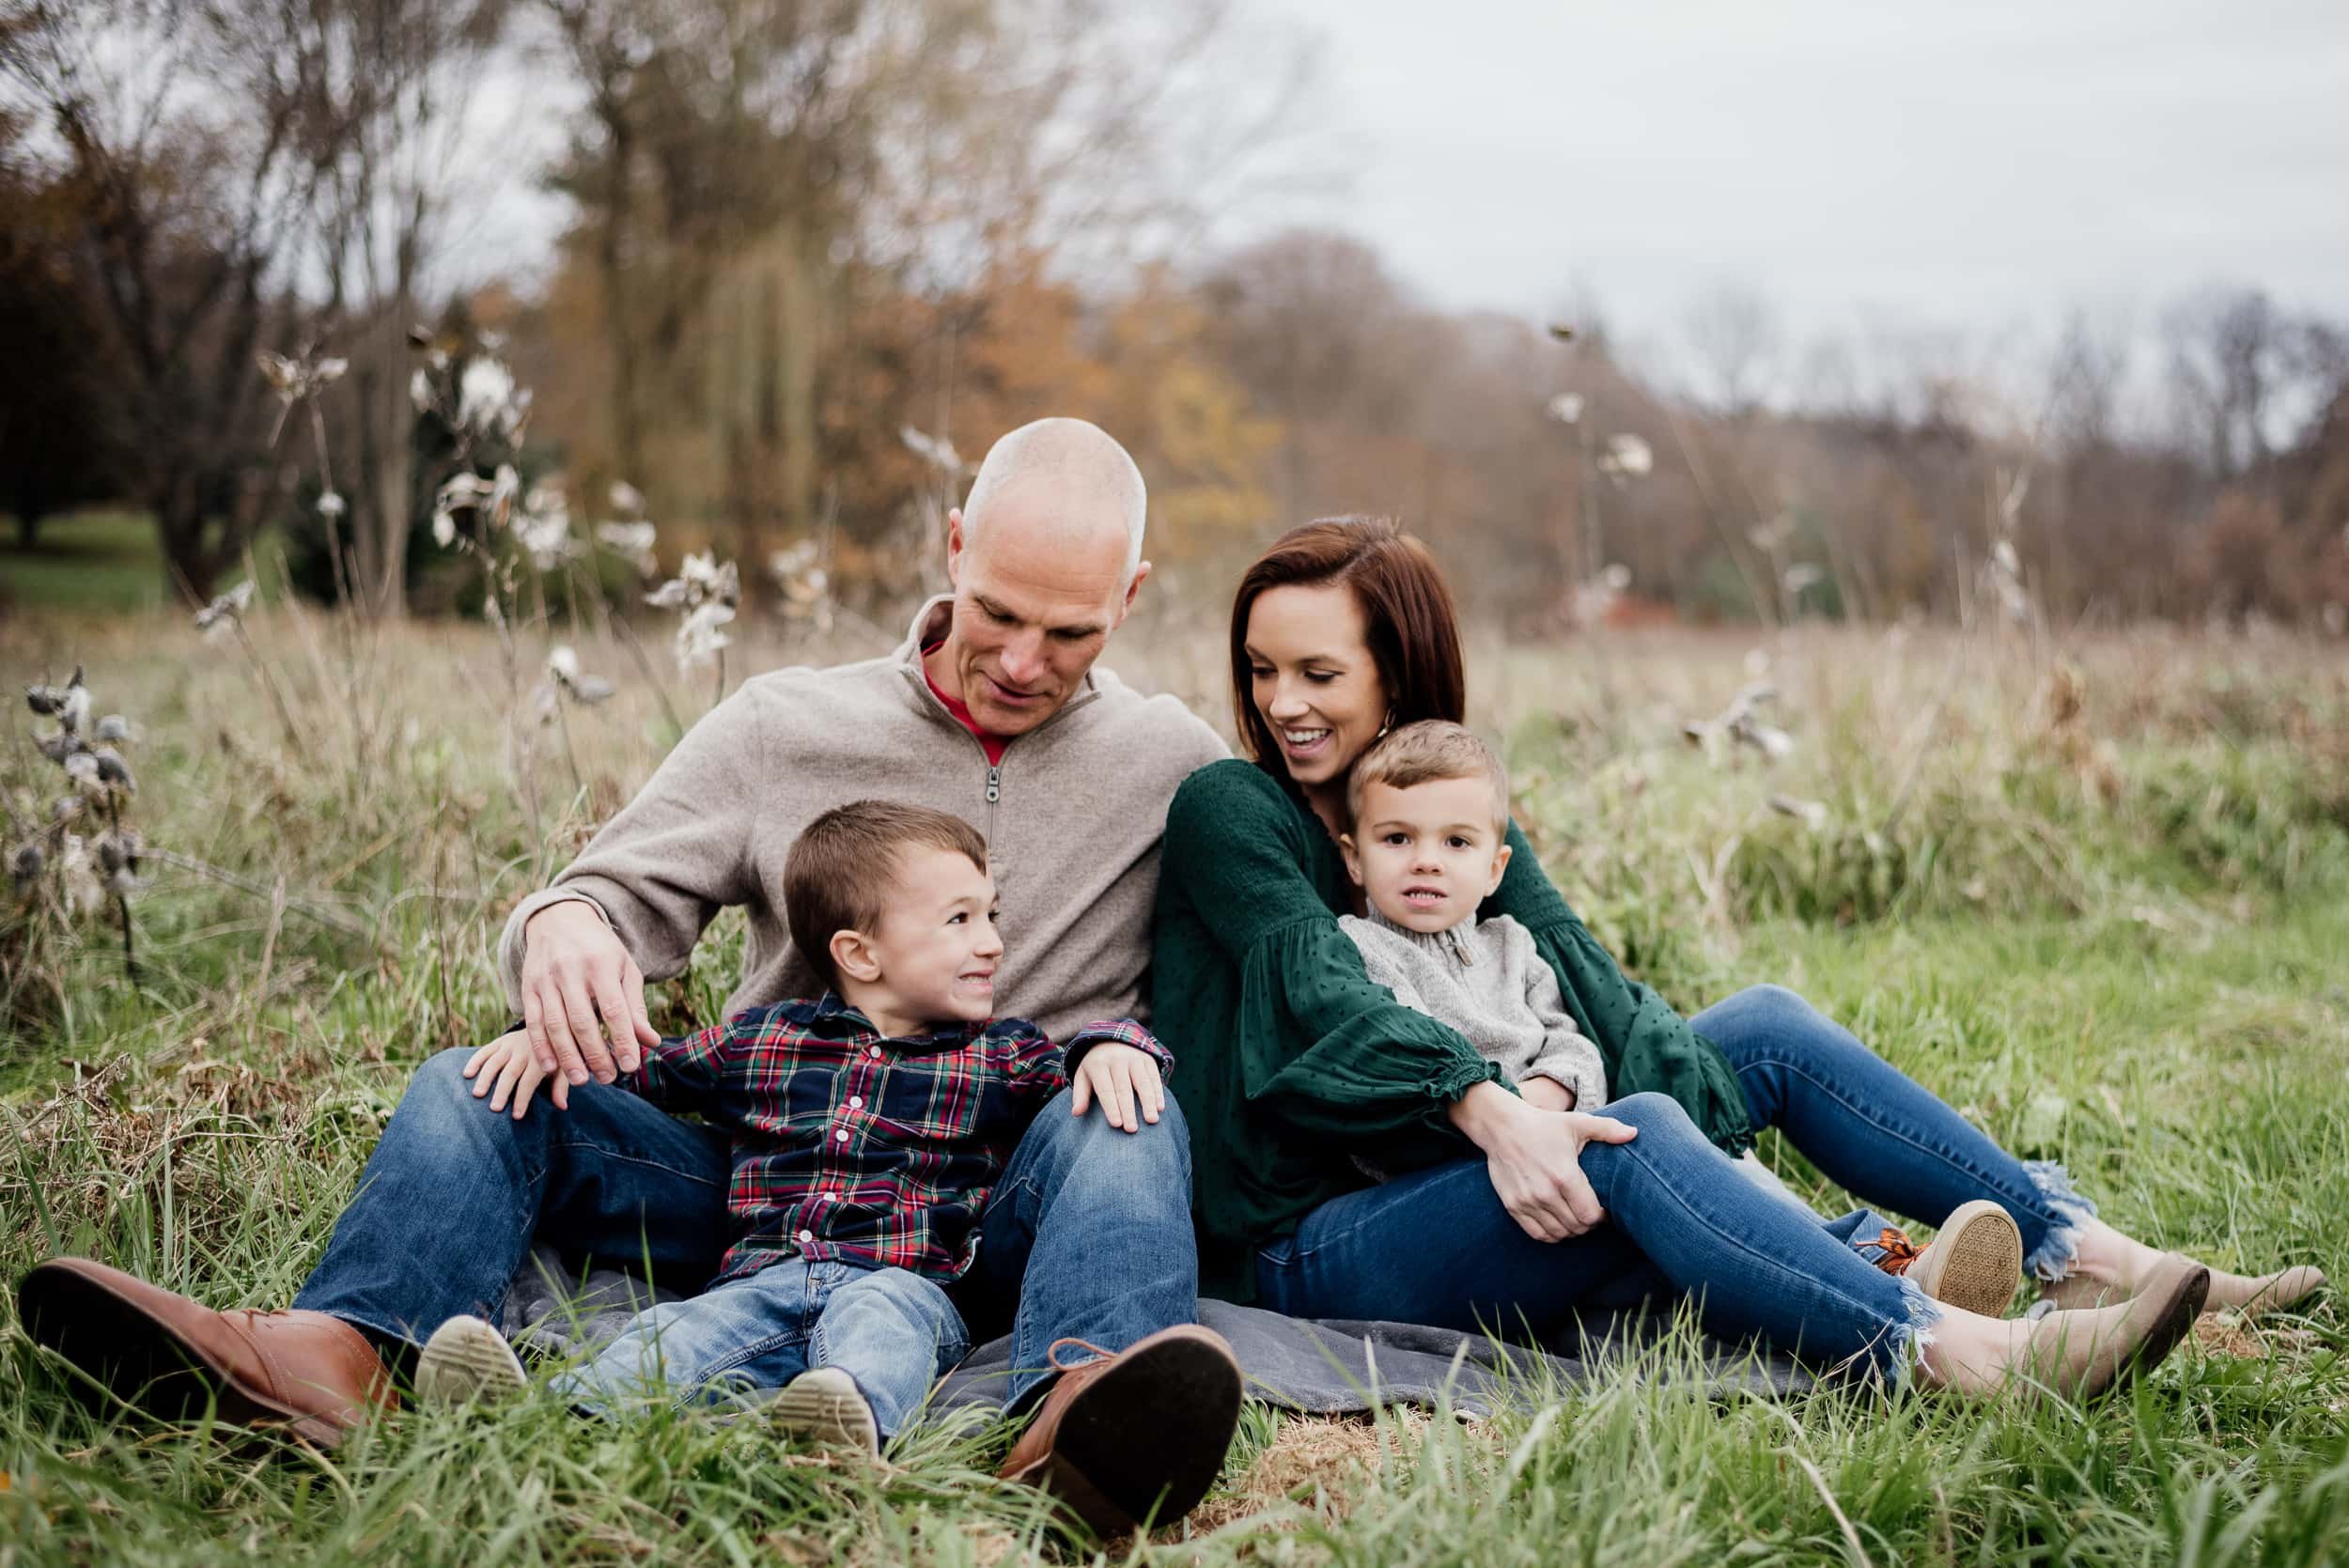 Pin by Maria Hassman on photo ideas | Family portrait poses, Fall family  photos, Family picture outfits